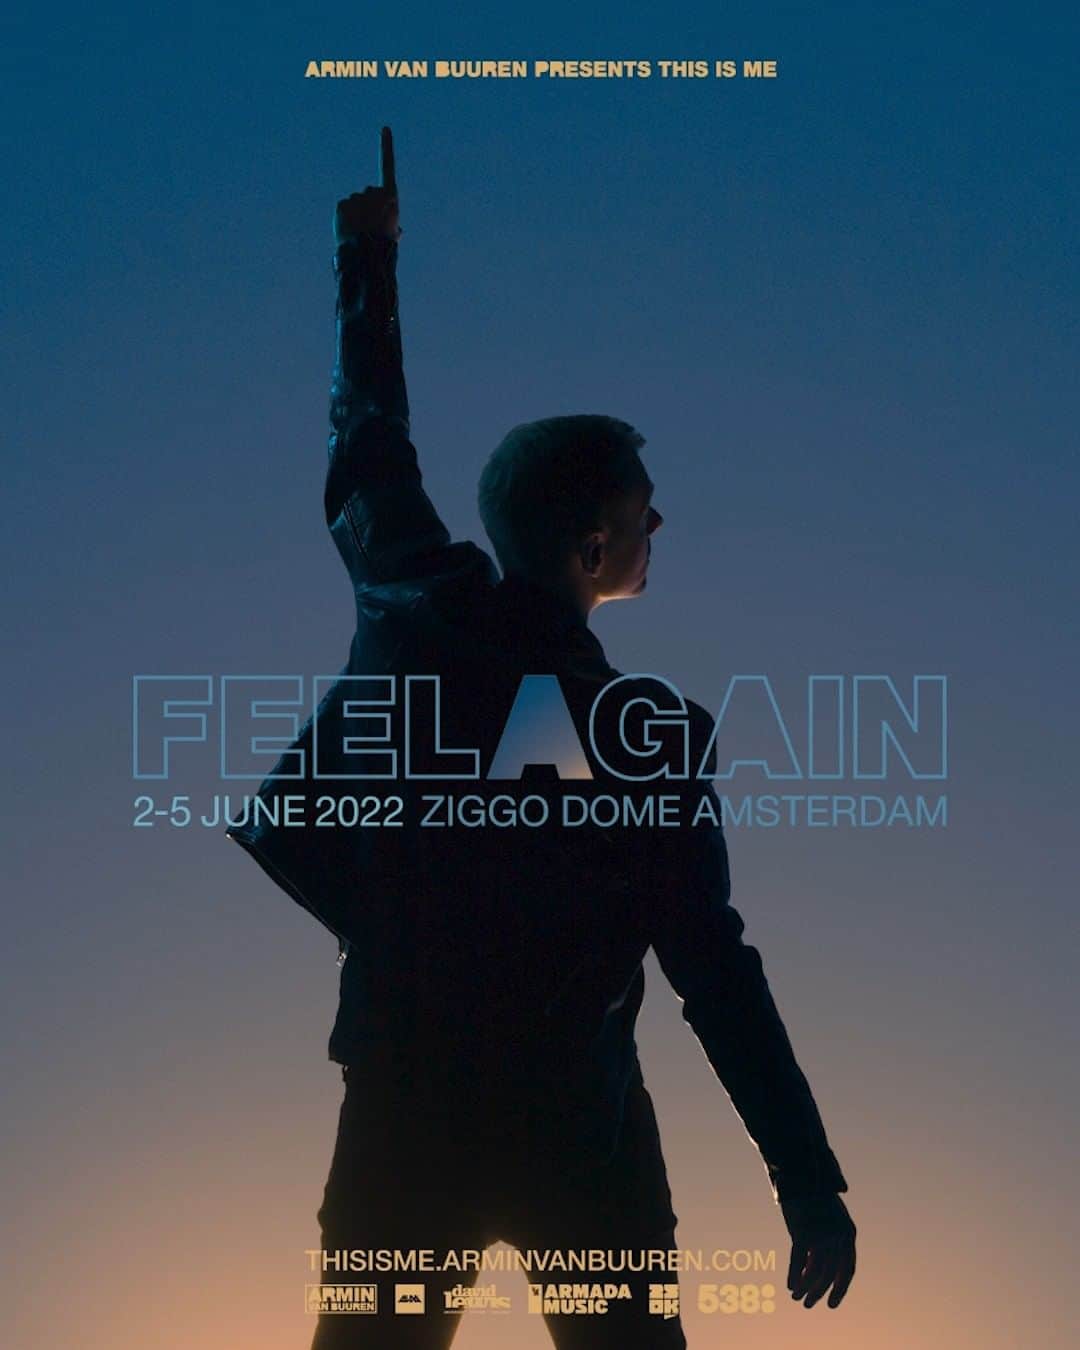 Armin Van Buurenのインスタグラム：「After two years, it’s time to feel again. I want to take your hands and raise 'em to the sky like there’s no tomorrow. I wanna come together and feel again. This is me. 🙏🏻   Join me on 2, 3, 4 or 5 June in the Ziggo Dome, Amsterdam. Final tickets go on sale on March 31st.」